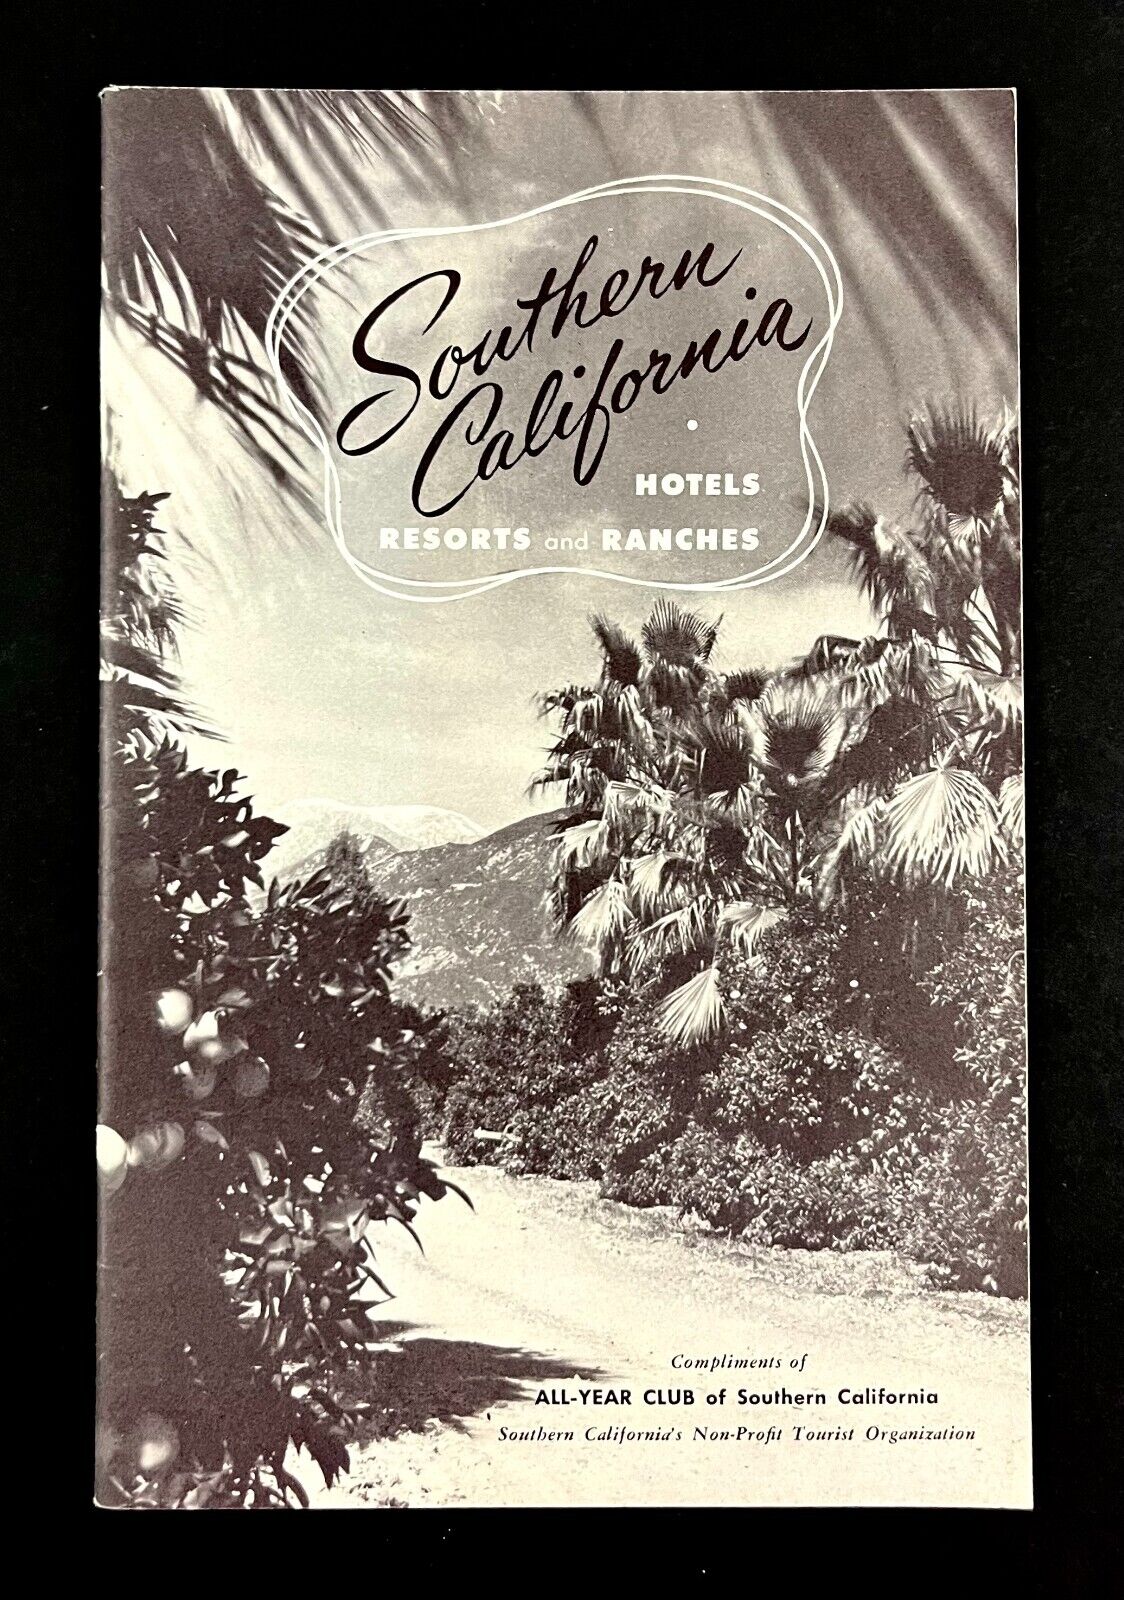 1948 Southern California Hotels Resorts Ranches Vintage Travel Lodging Booklet